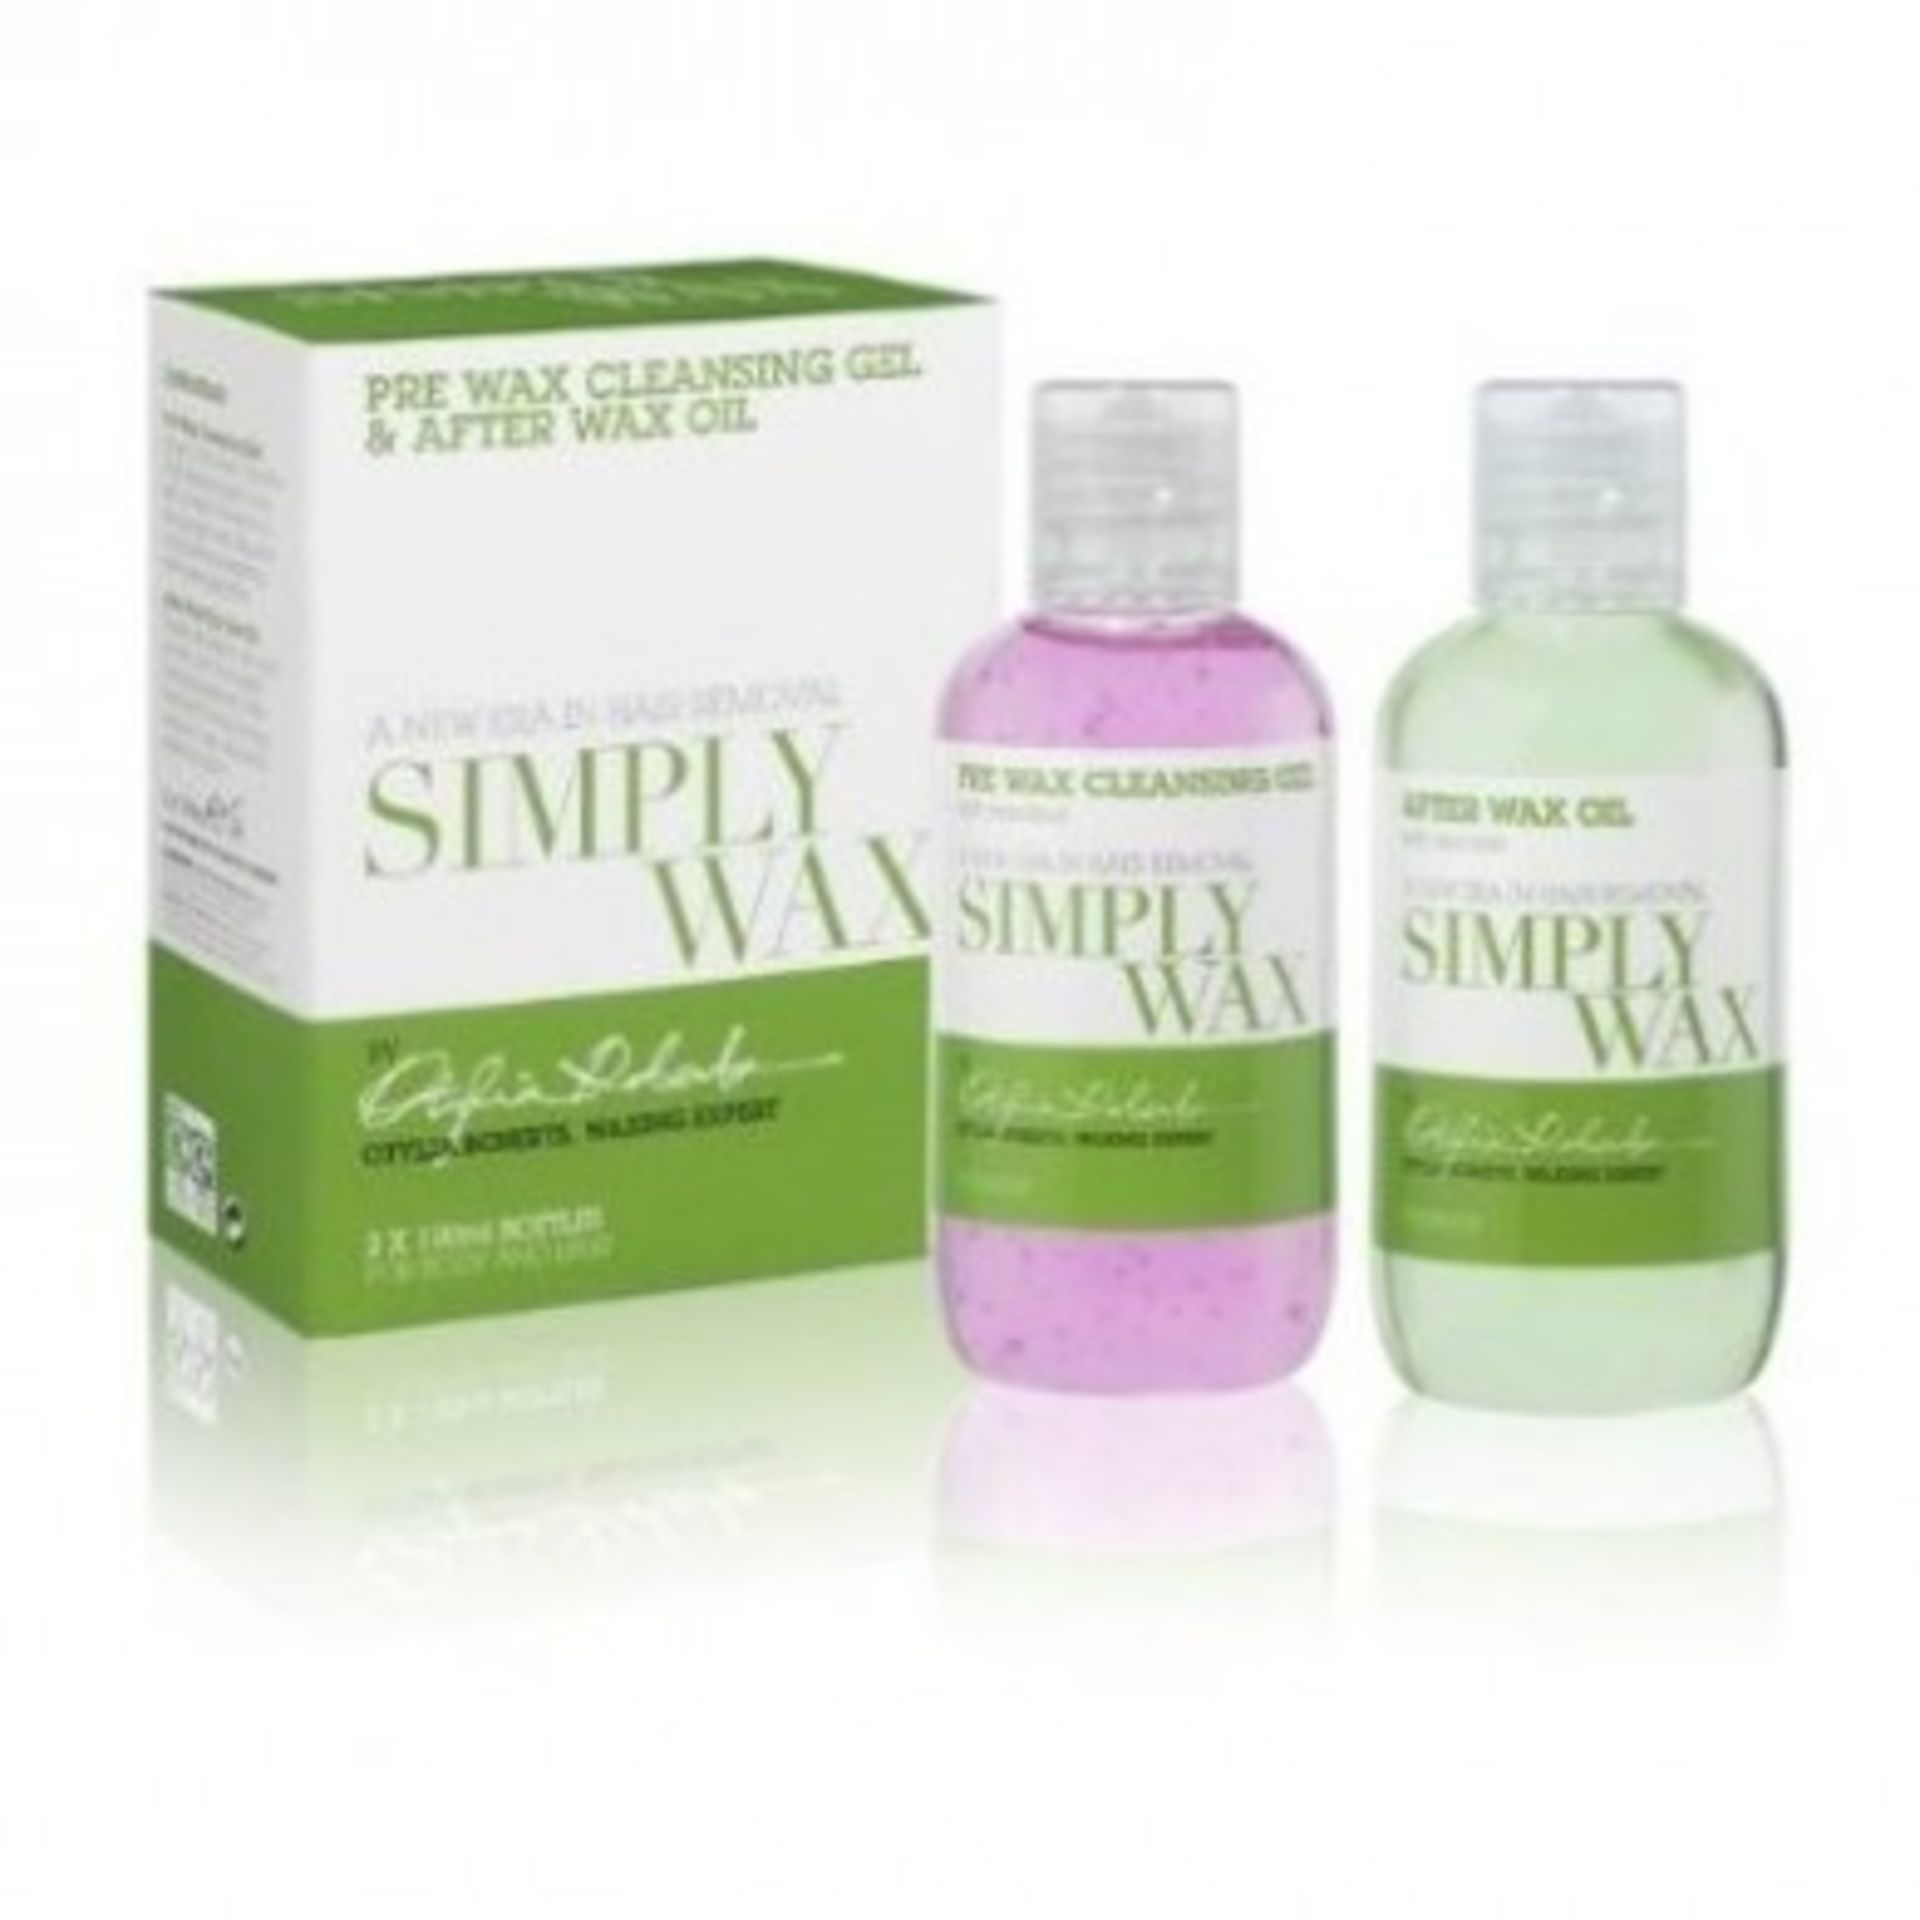 100 x Simply Wax Sets – pre wax cleansing gel + after wax oil2×100ml per set – UK Delivery £20 –